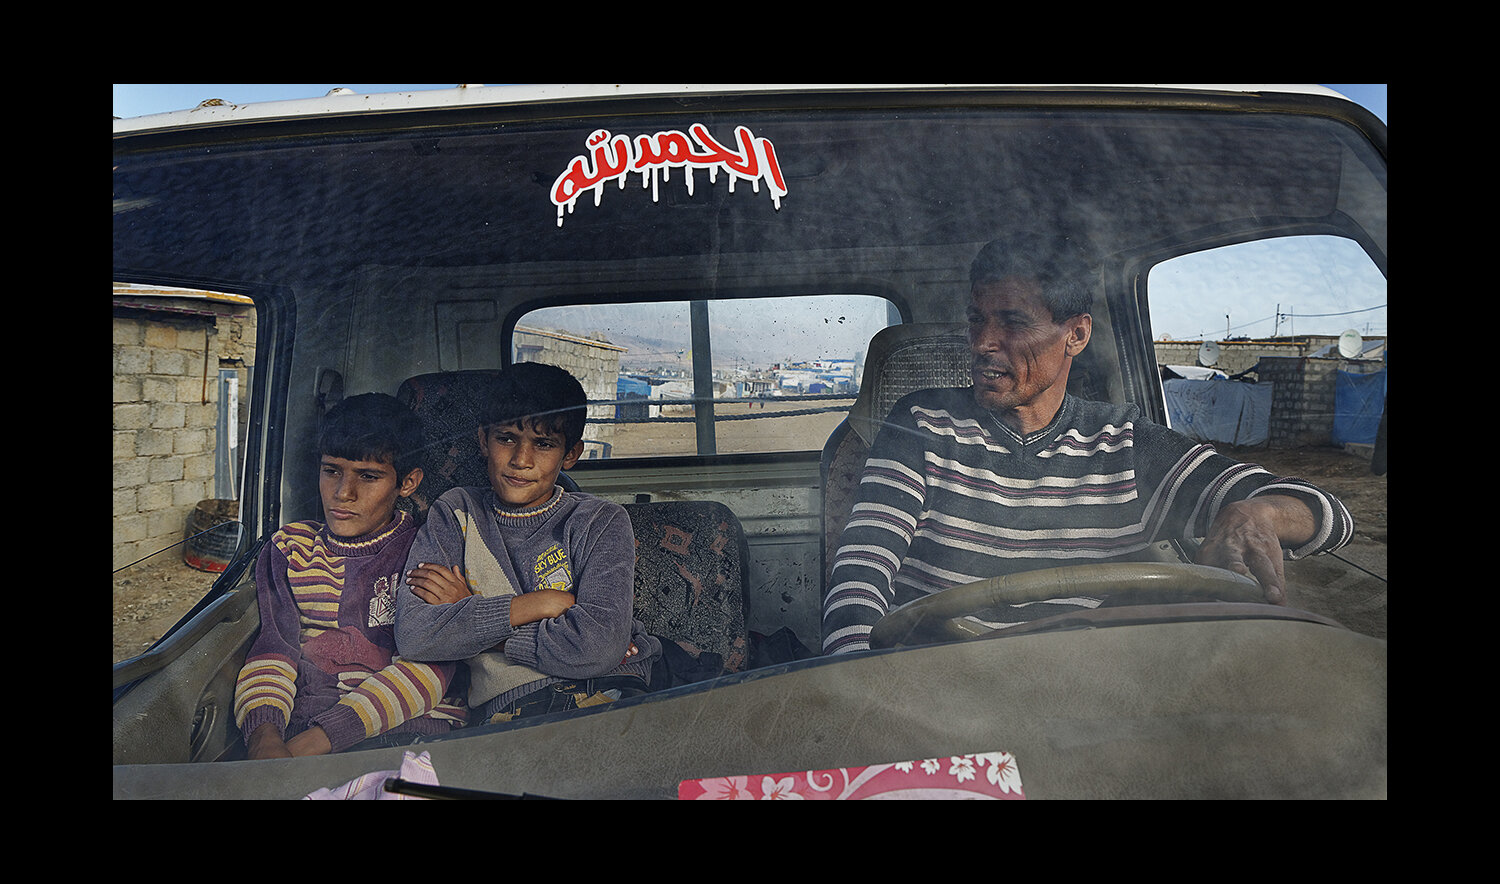  A refugee family squeezes into a car at the Domiz Camp for Syrian Refugees just outside of Dohuk, Iraq. 2013 